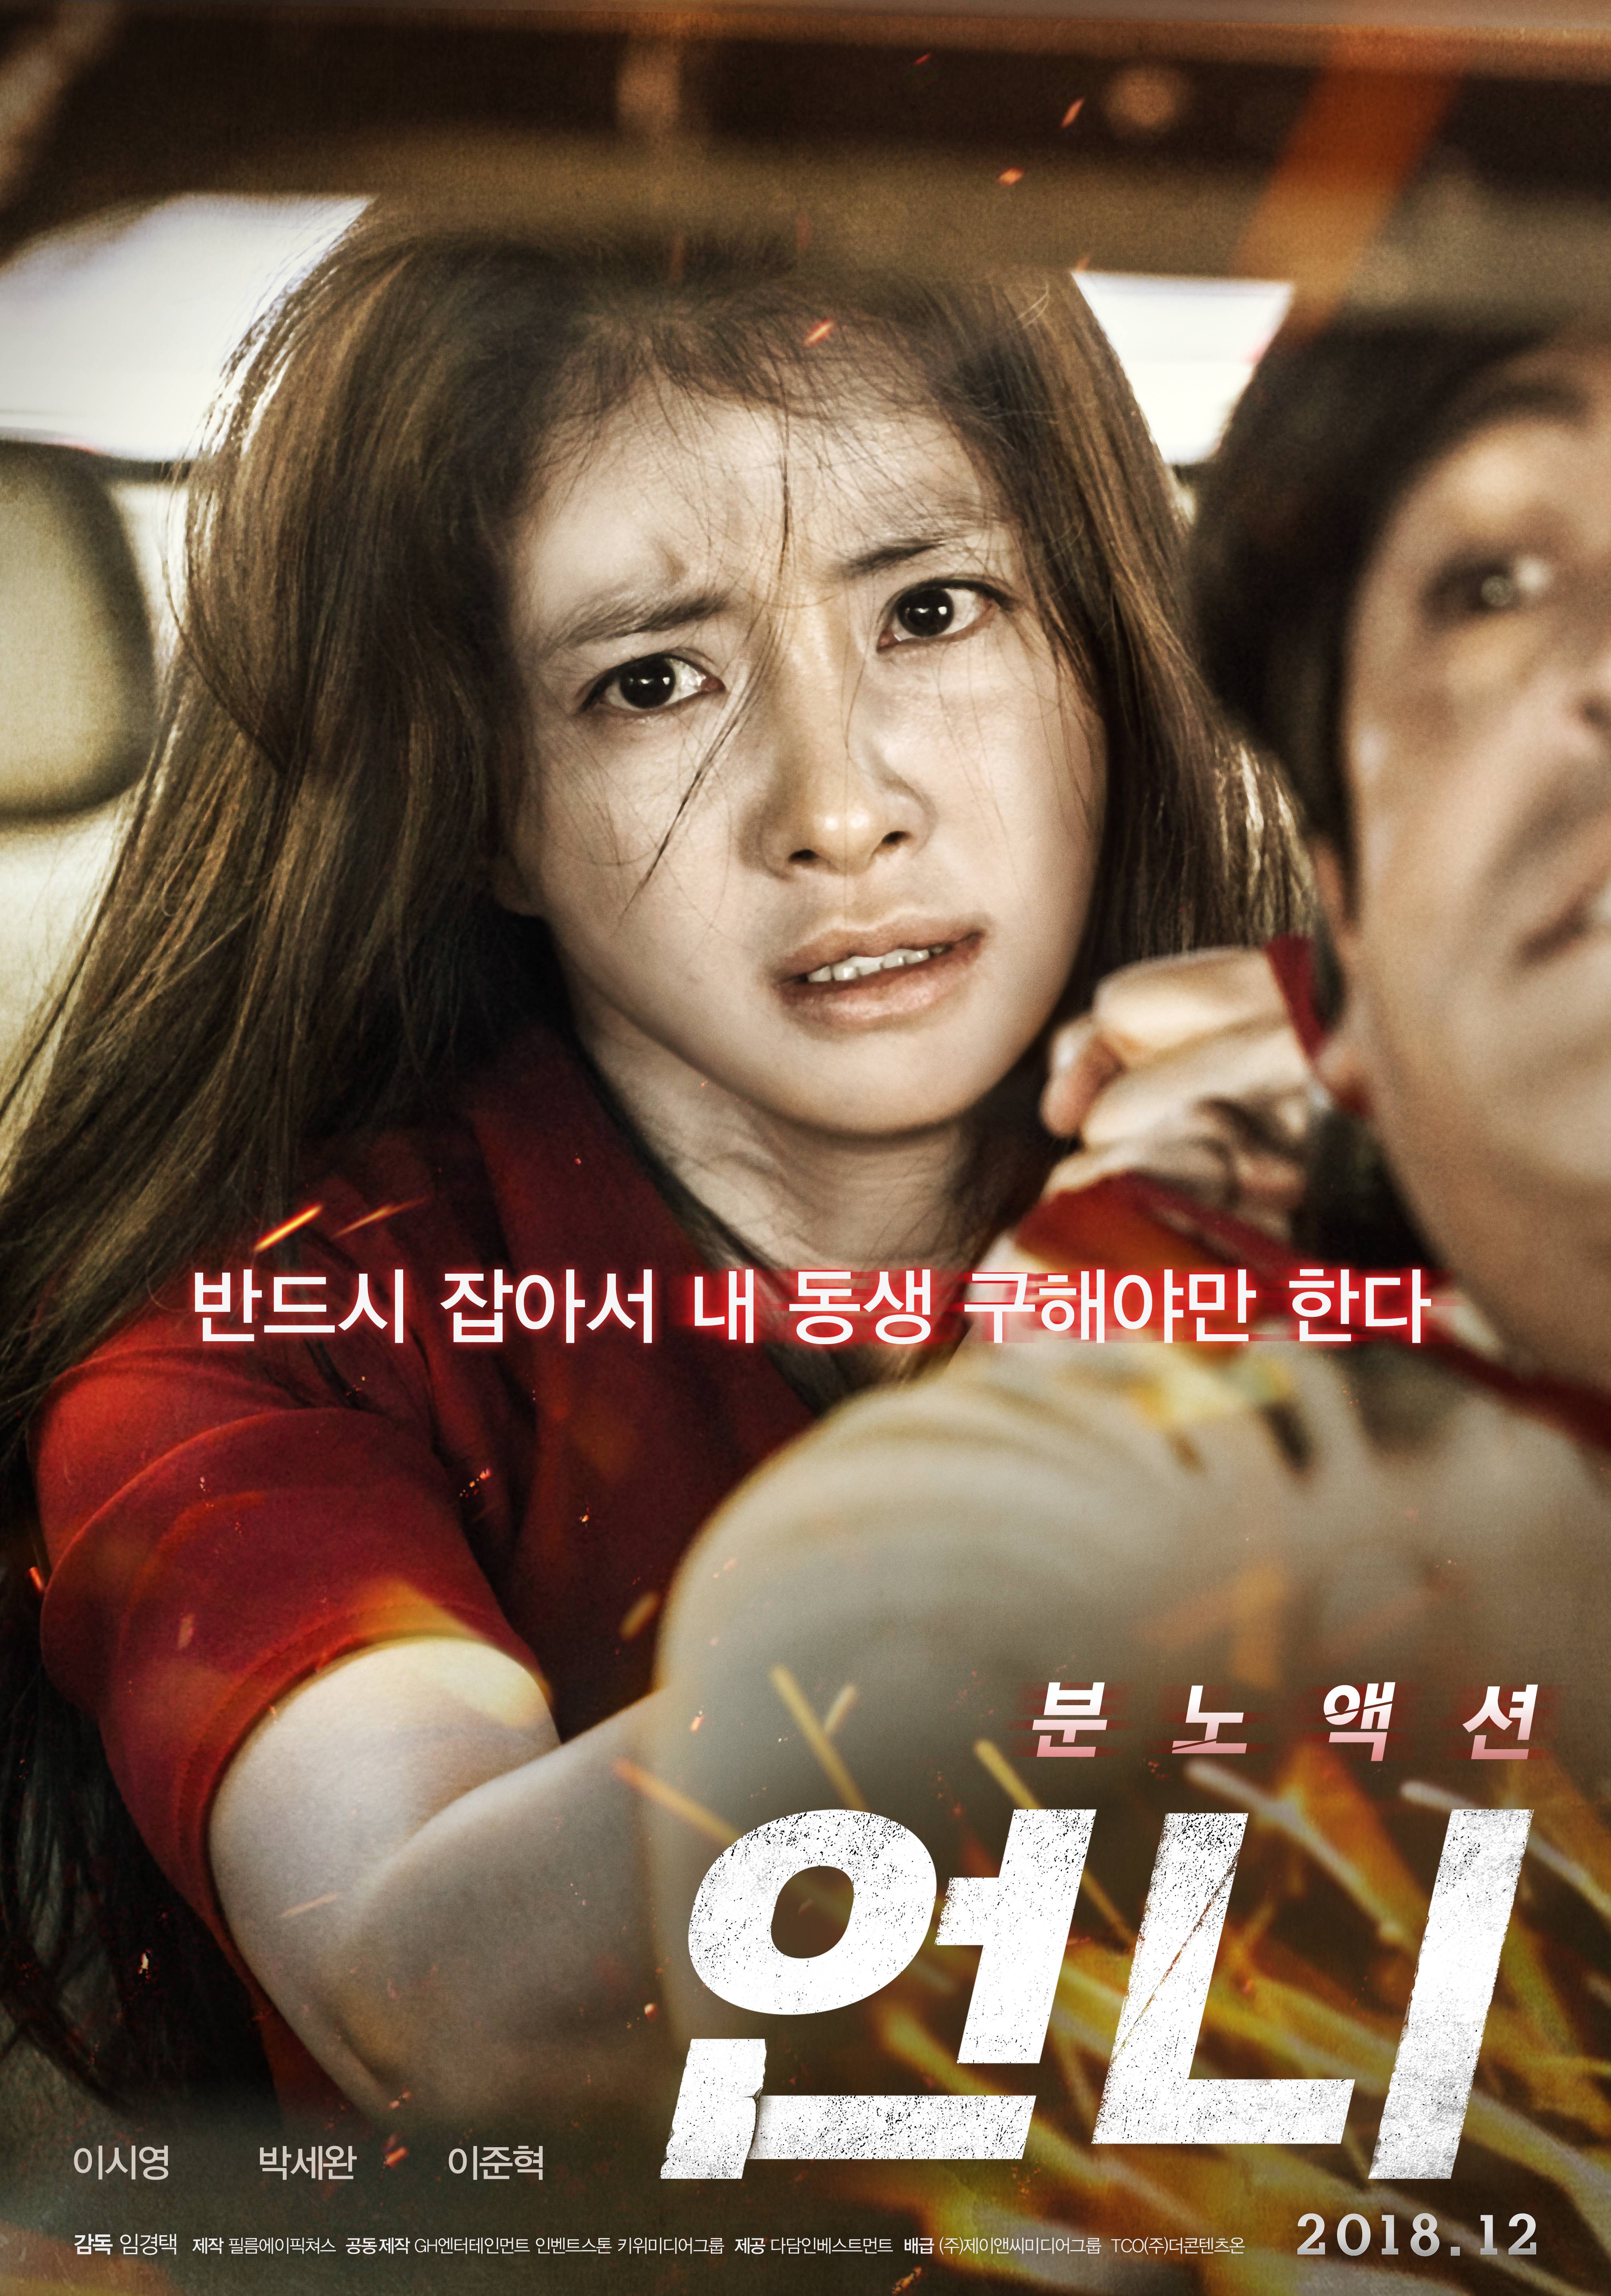 Photo Lee Si Young Is Riveting In Newest Poster For No Mercy